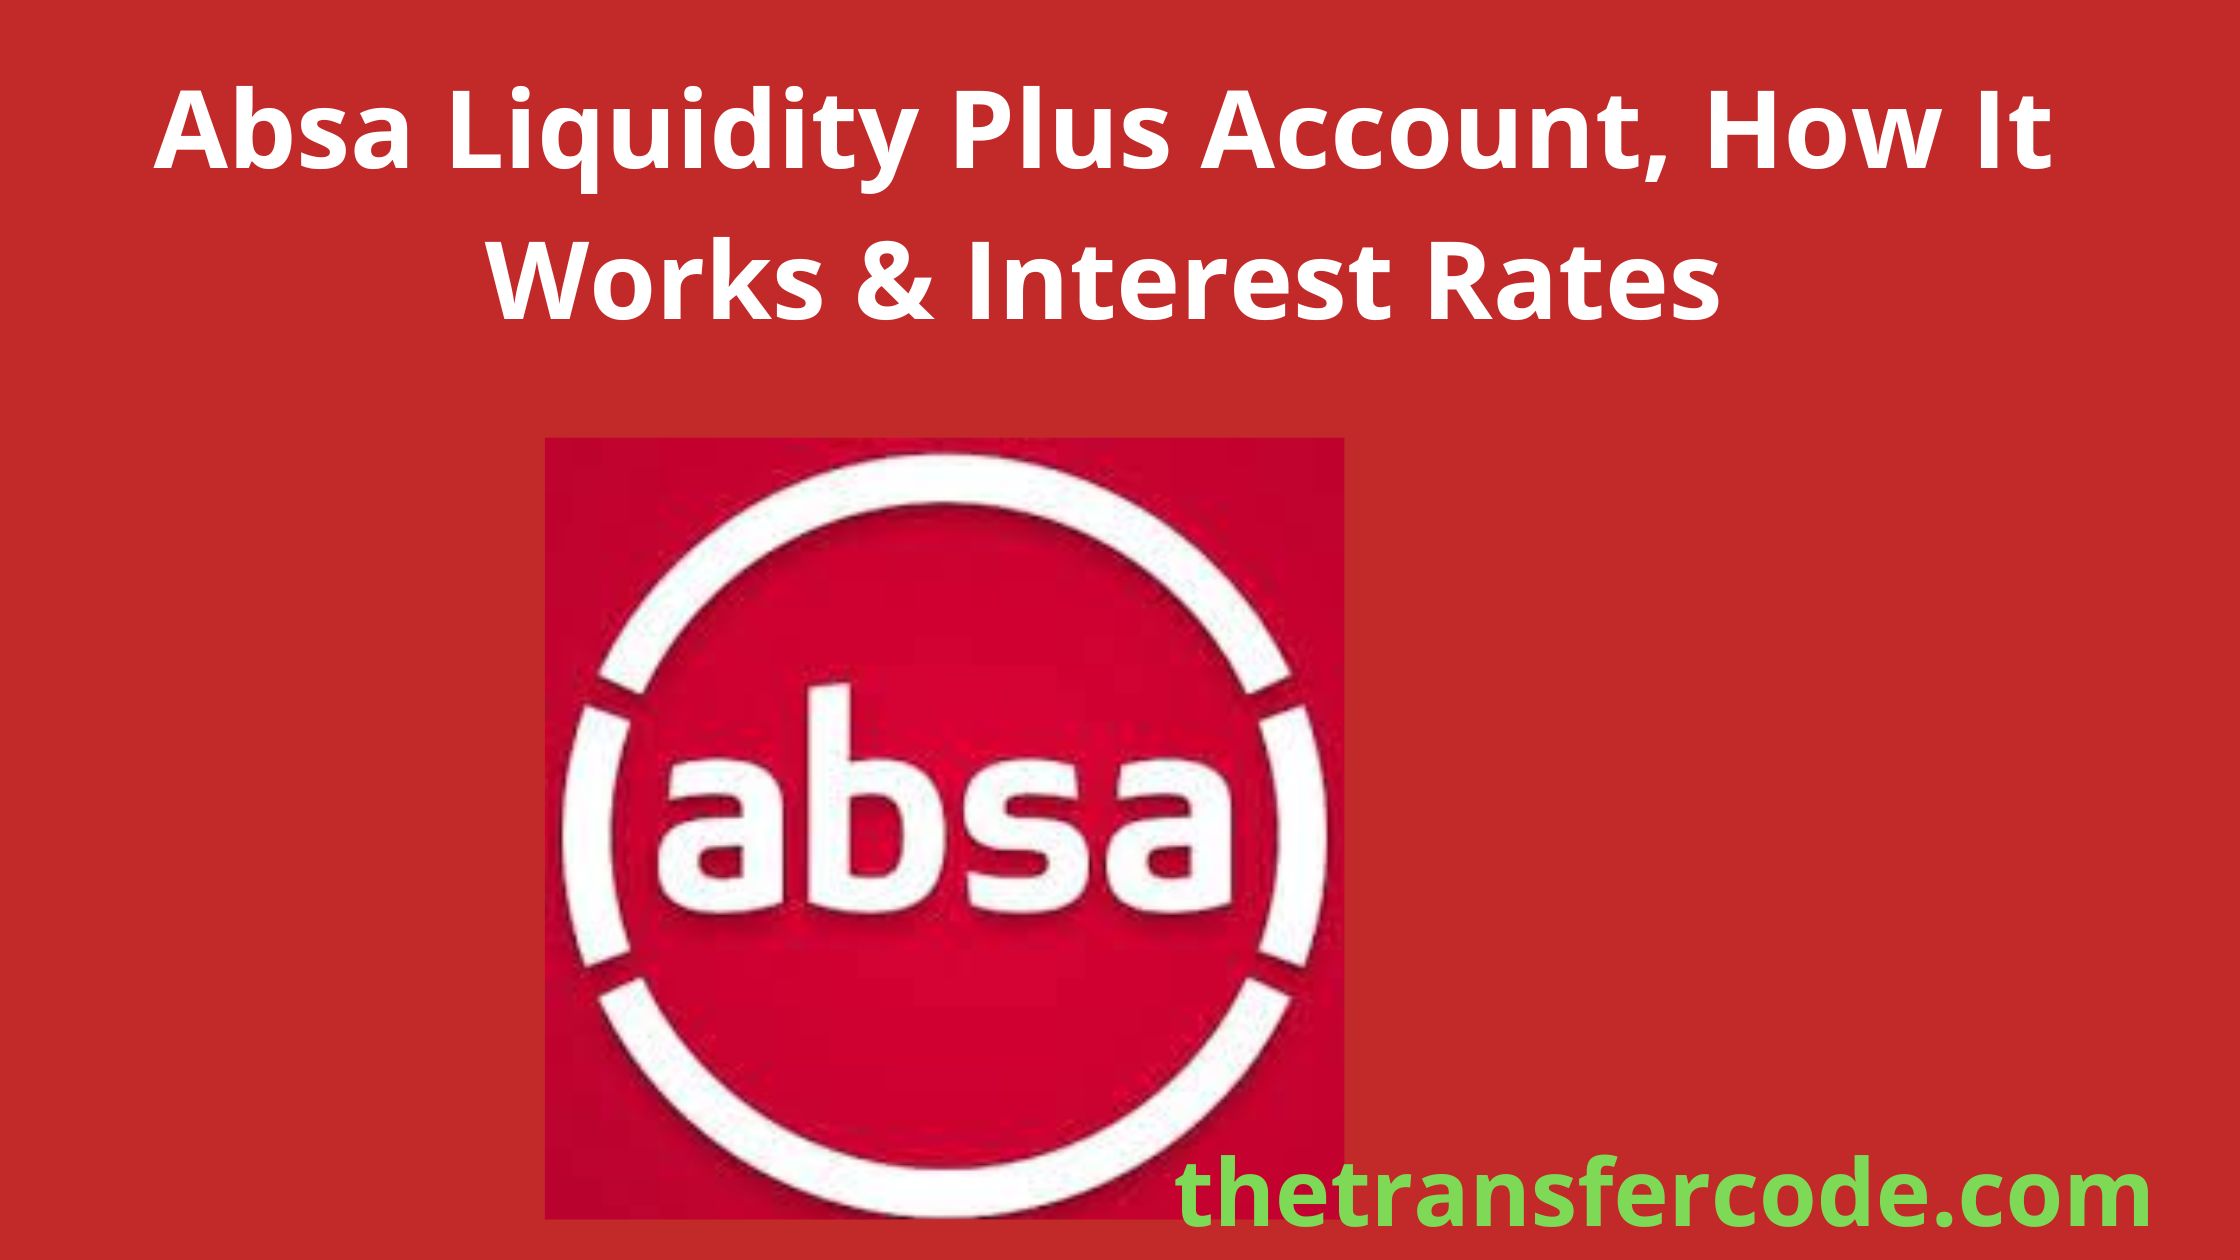 Absa Liquidity Plus Account, How It Works & Interest Rates